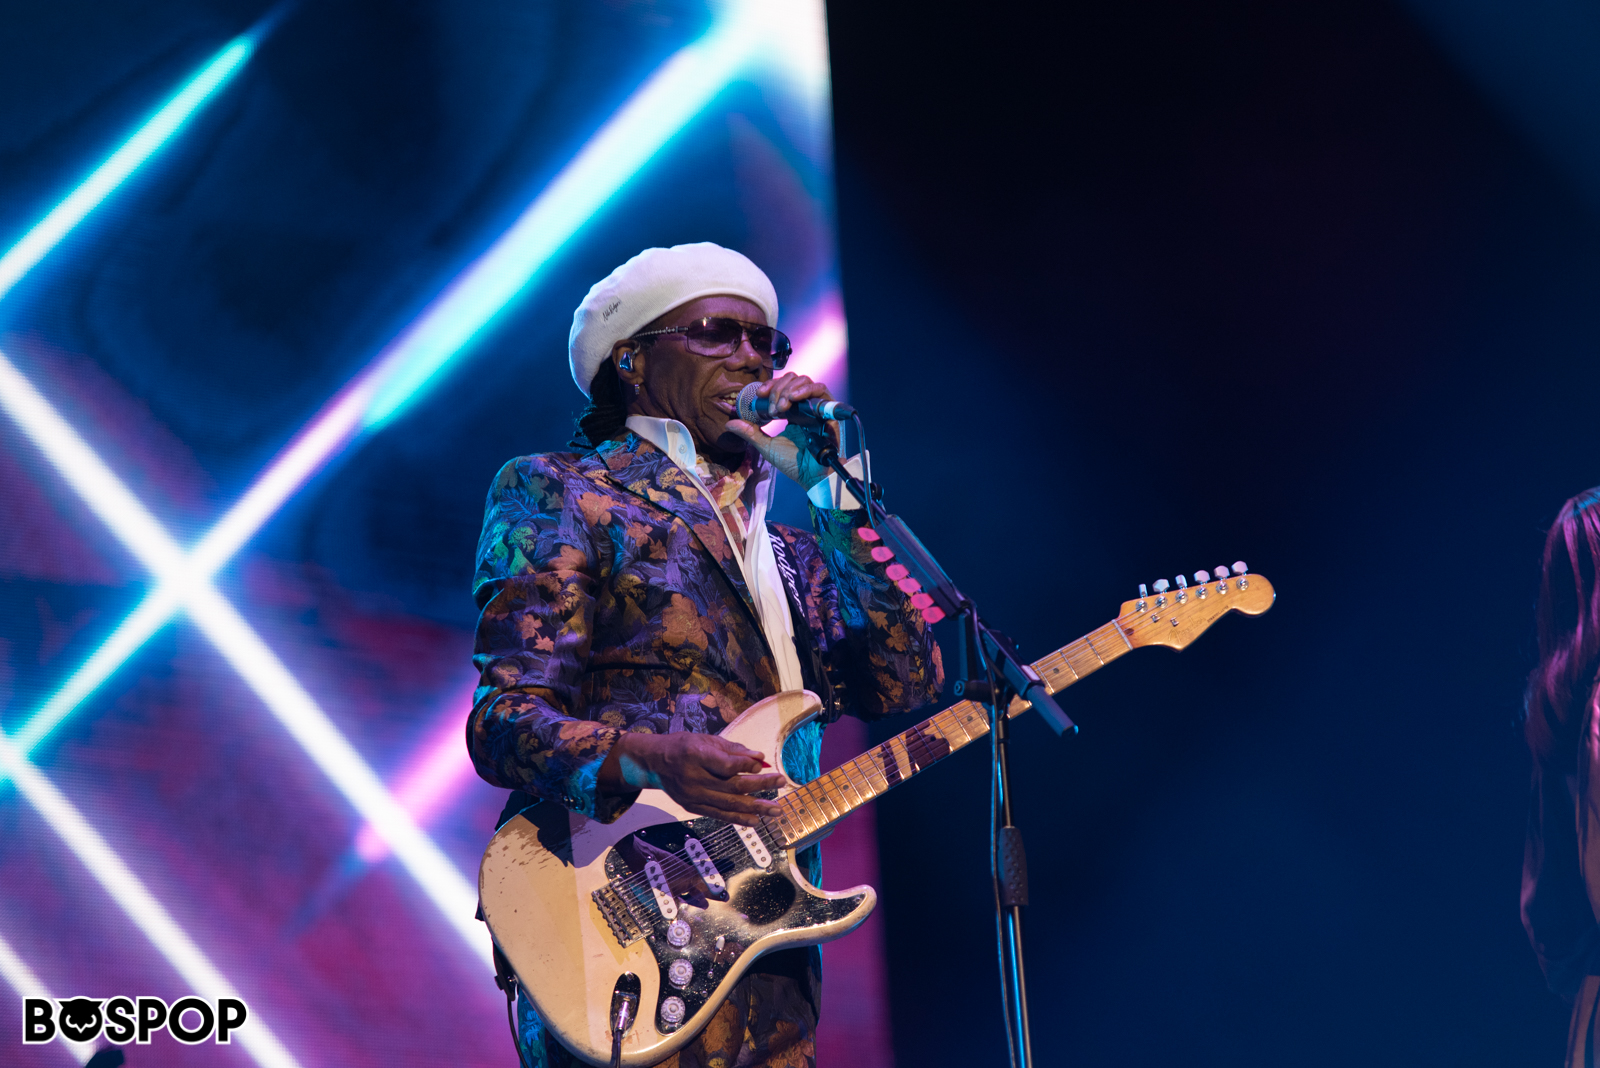 Nile_Rodgers_Chic-4265